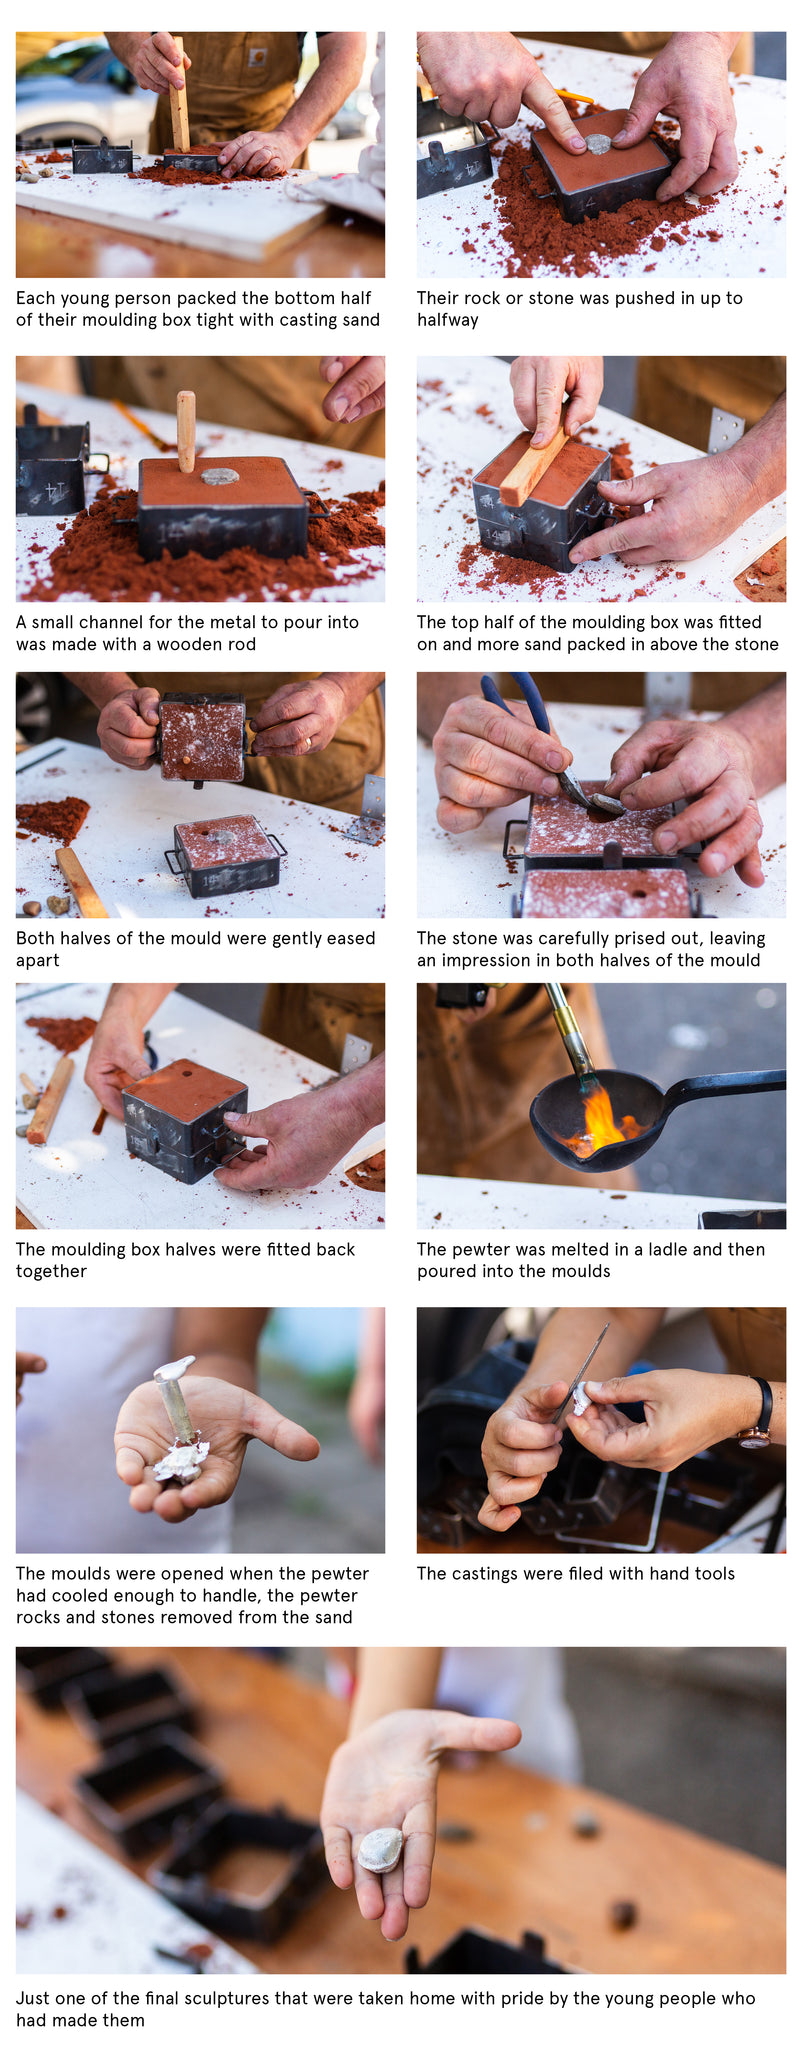 Images of the step by step process of pewter casting